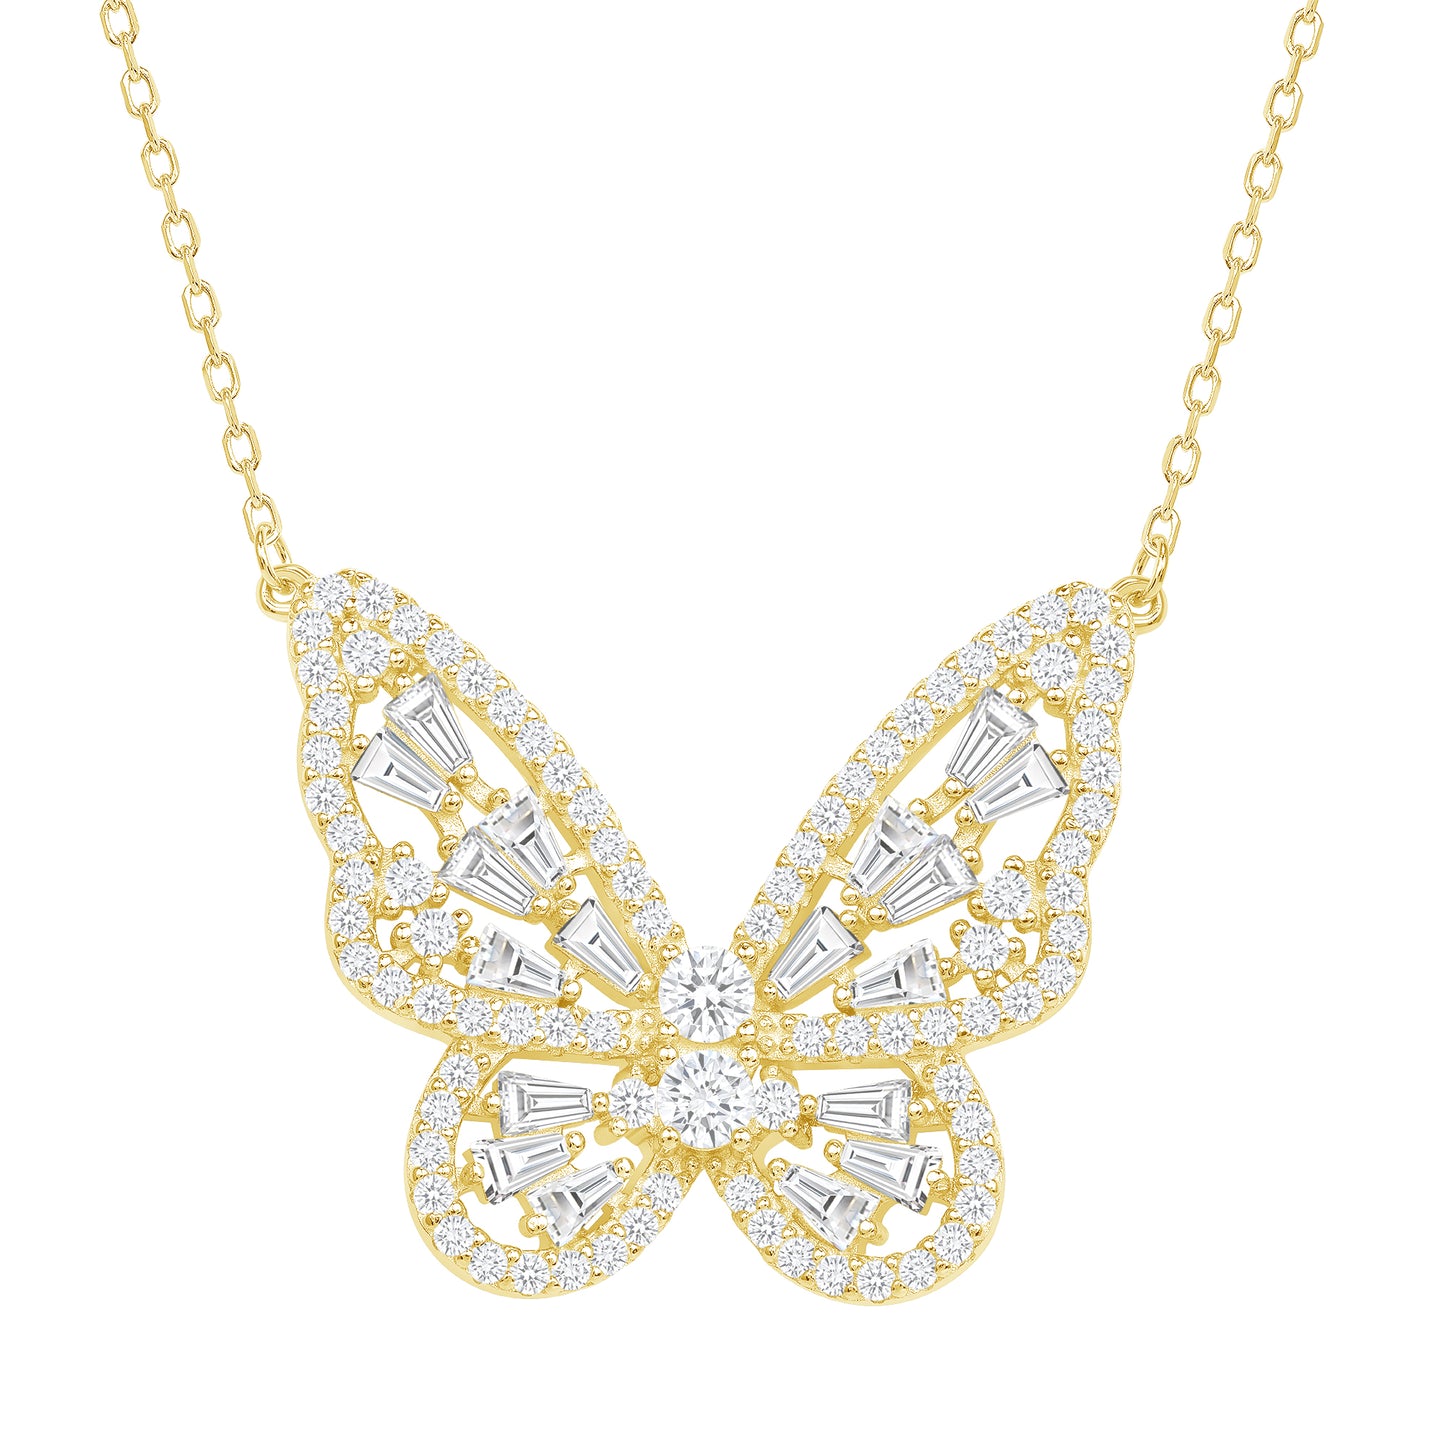 DGN1308GP. Silver 925 Gold Plated Baguette Cubic Zirconia Butterfly Necklace